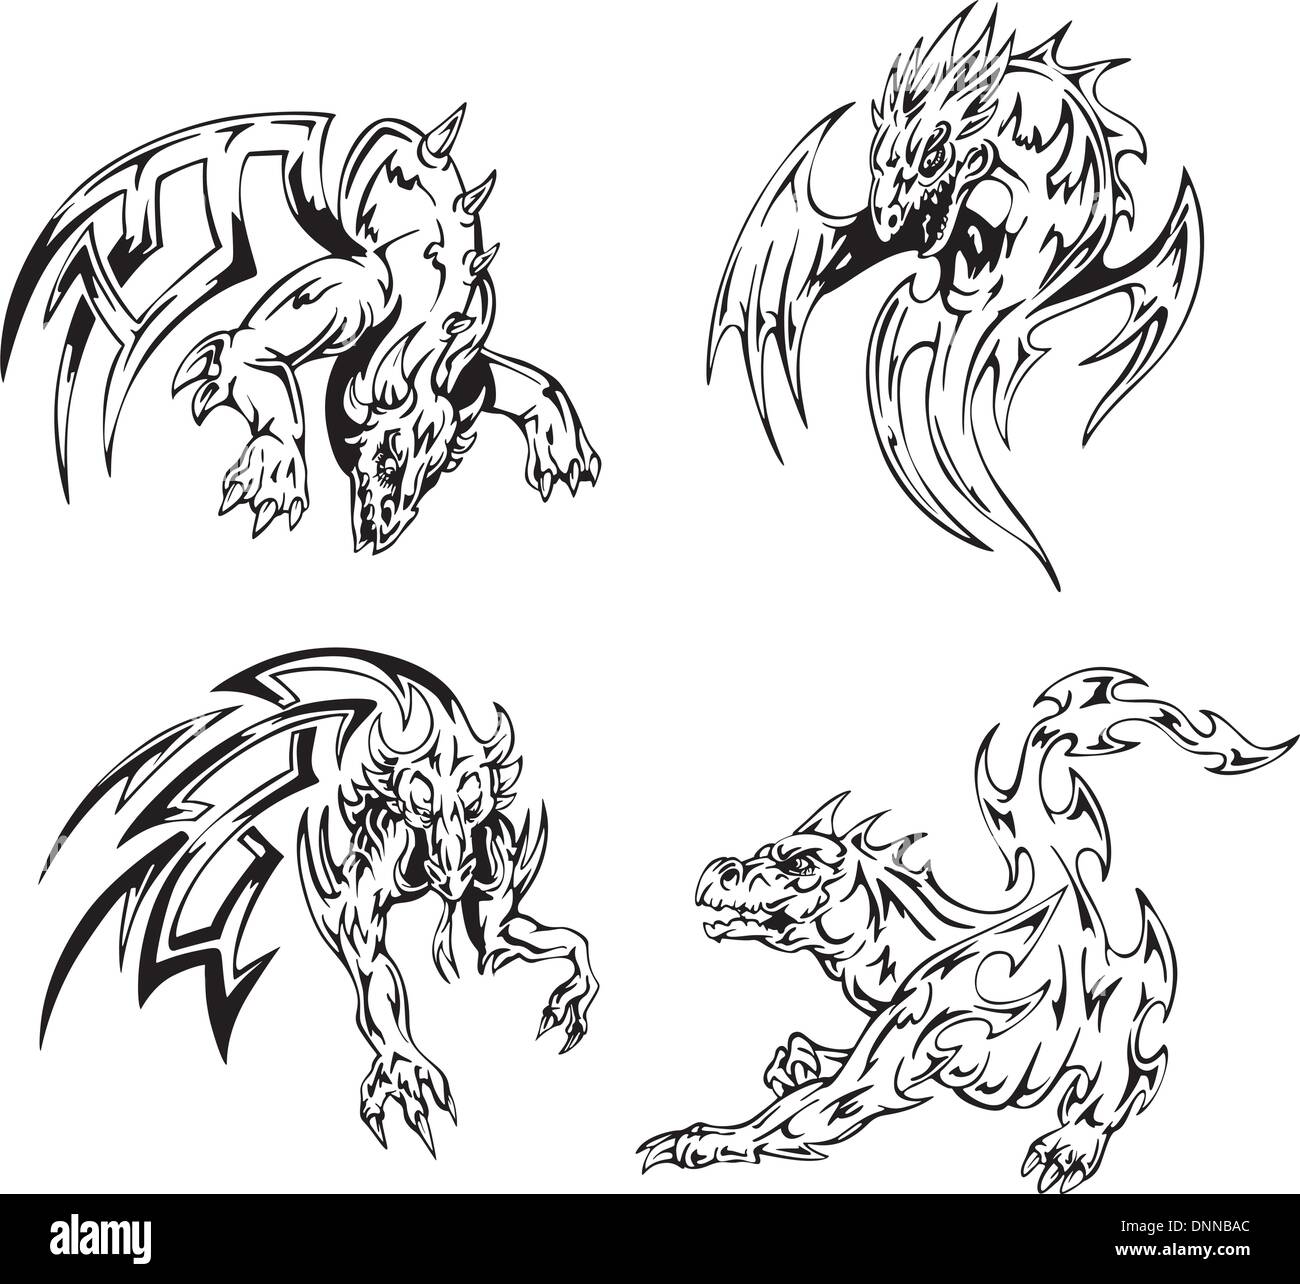 Dragon tattoos. Set of black and white vector illustrations. Stock Vector